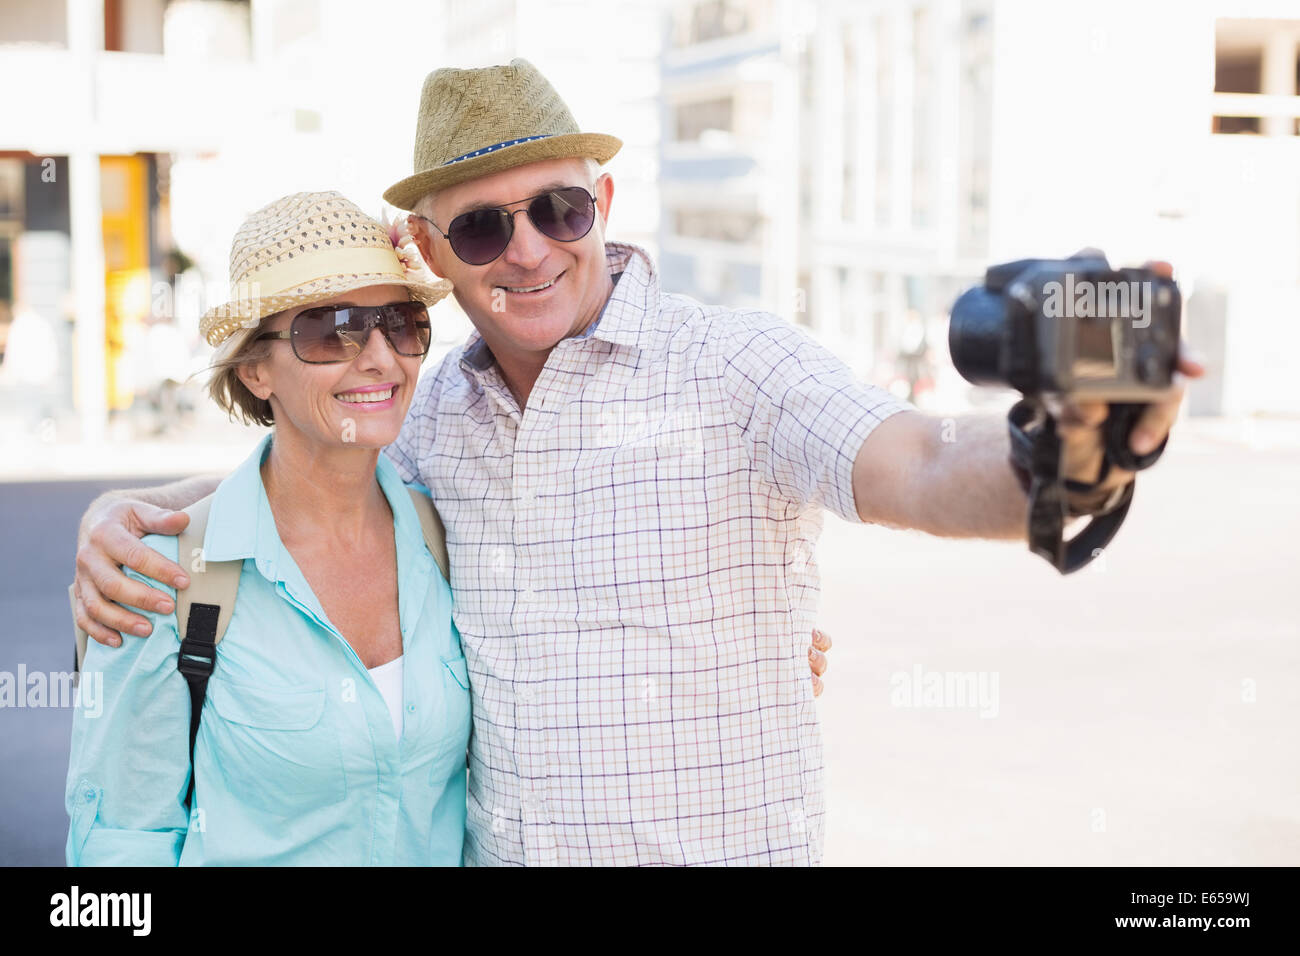 Happy tourist couple taking a selfie in the city Stock Photo